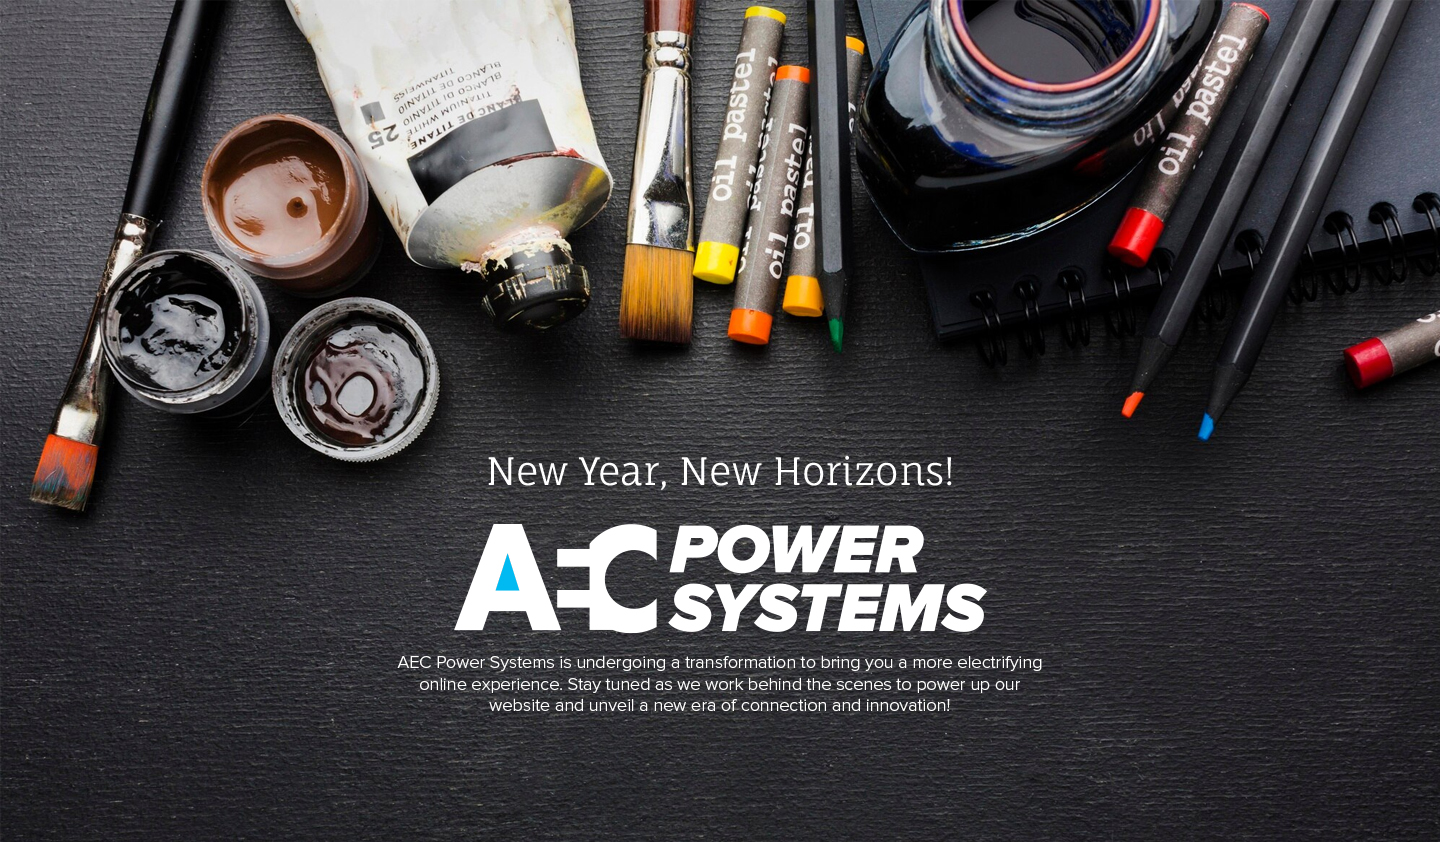 AEC POWER SYSTEMS